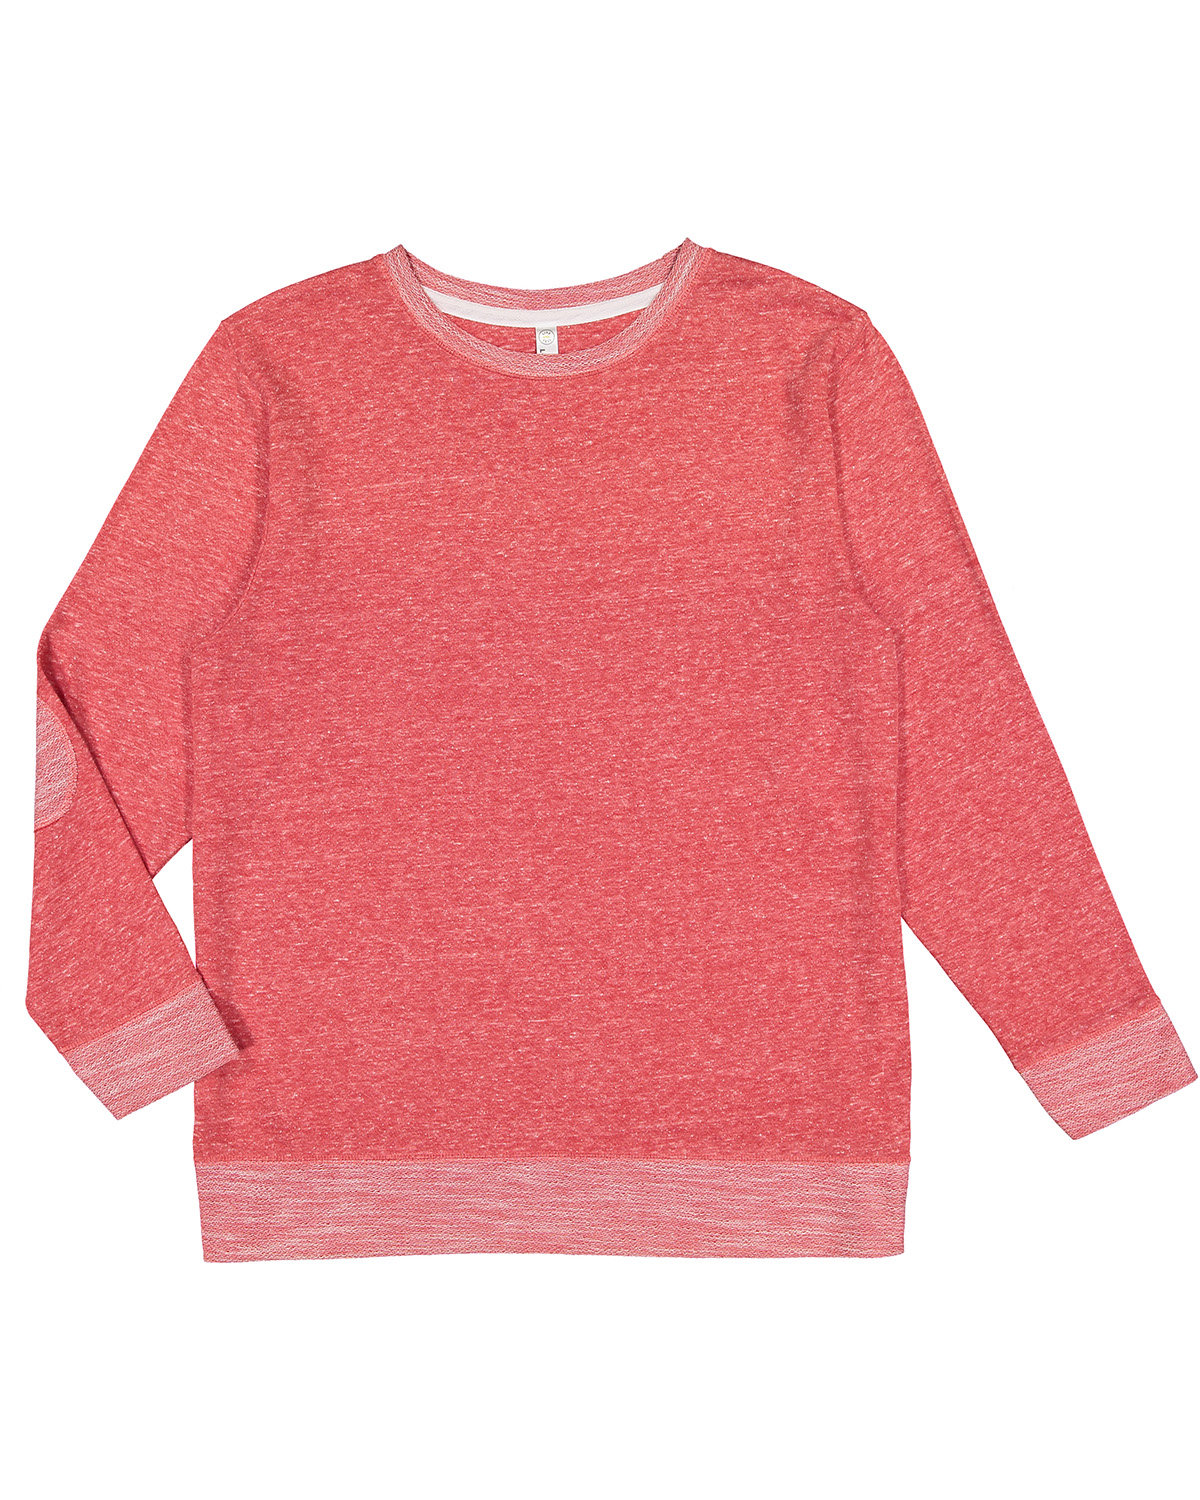 LAT Adult Harborside Melange French Terry Crewneck with Elbow Patches red melange 